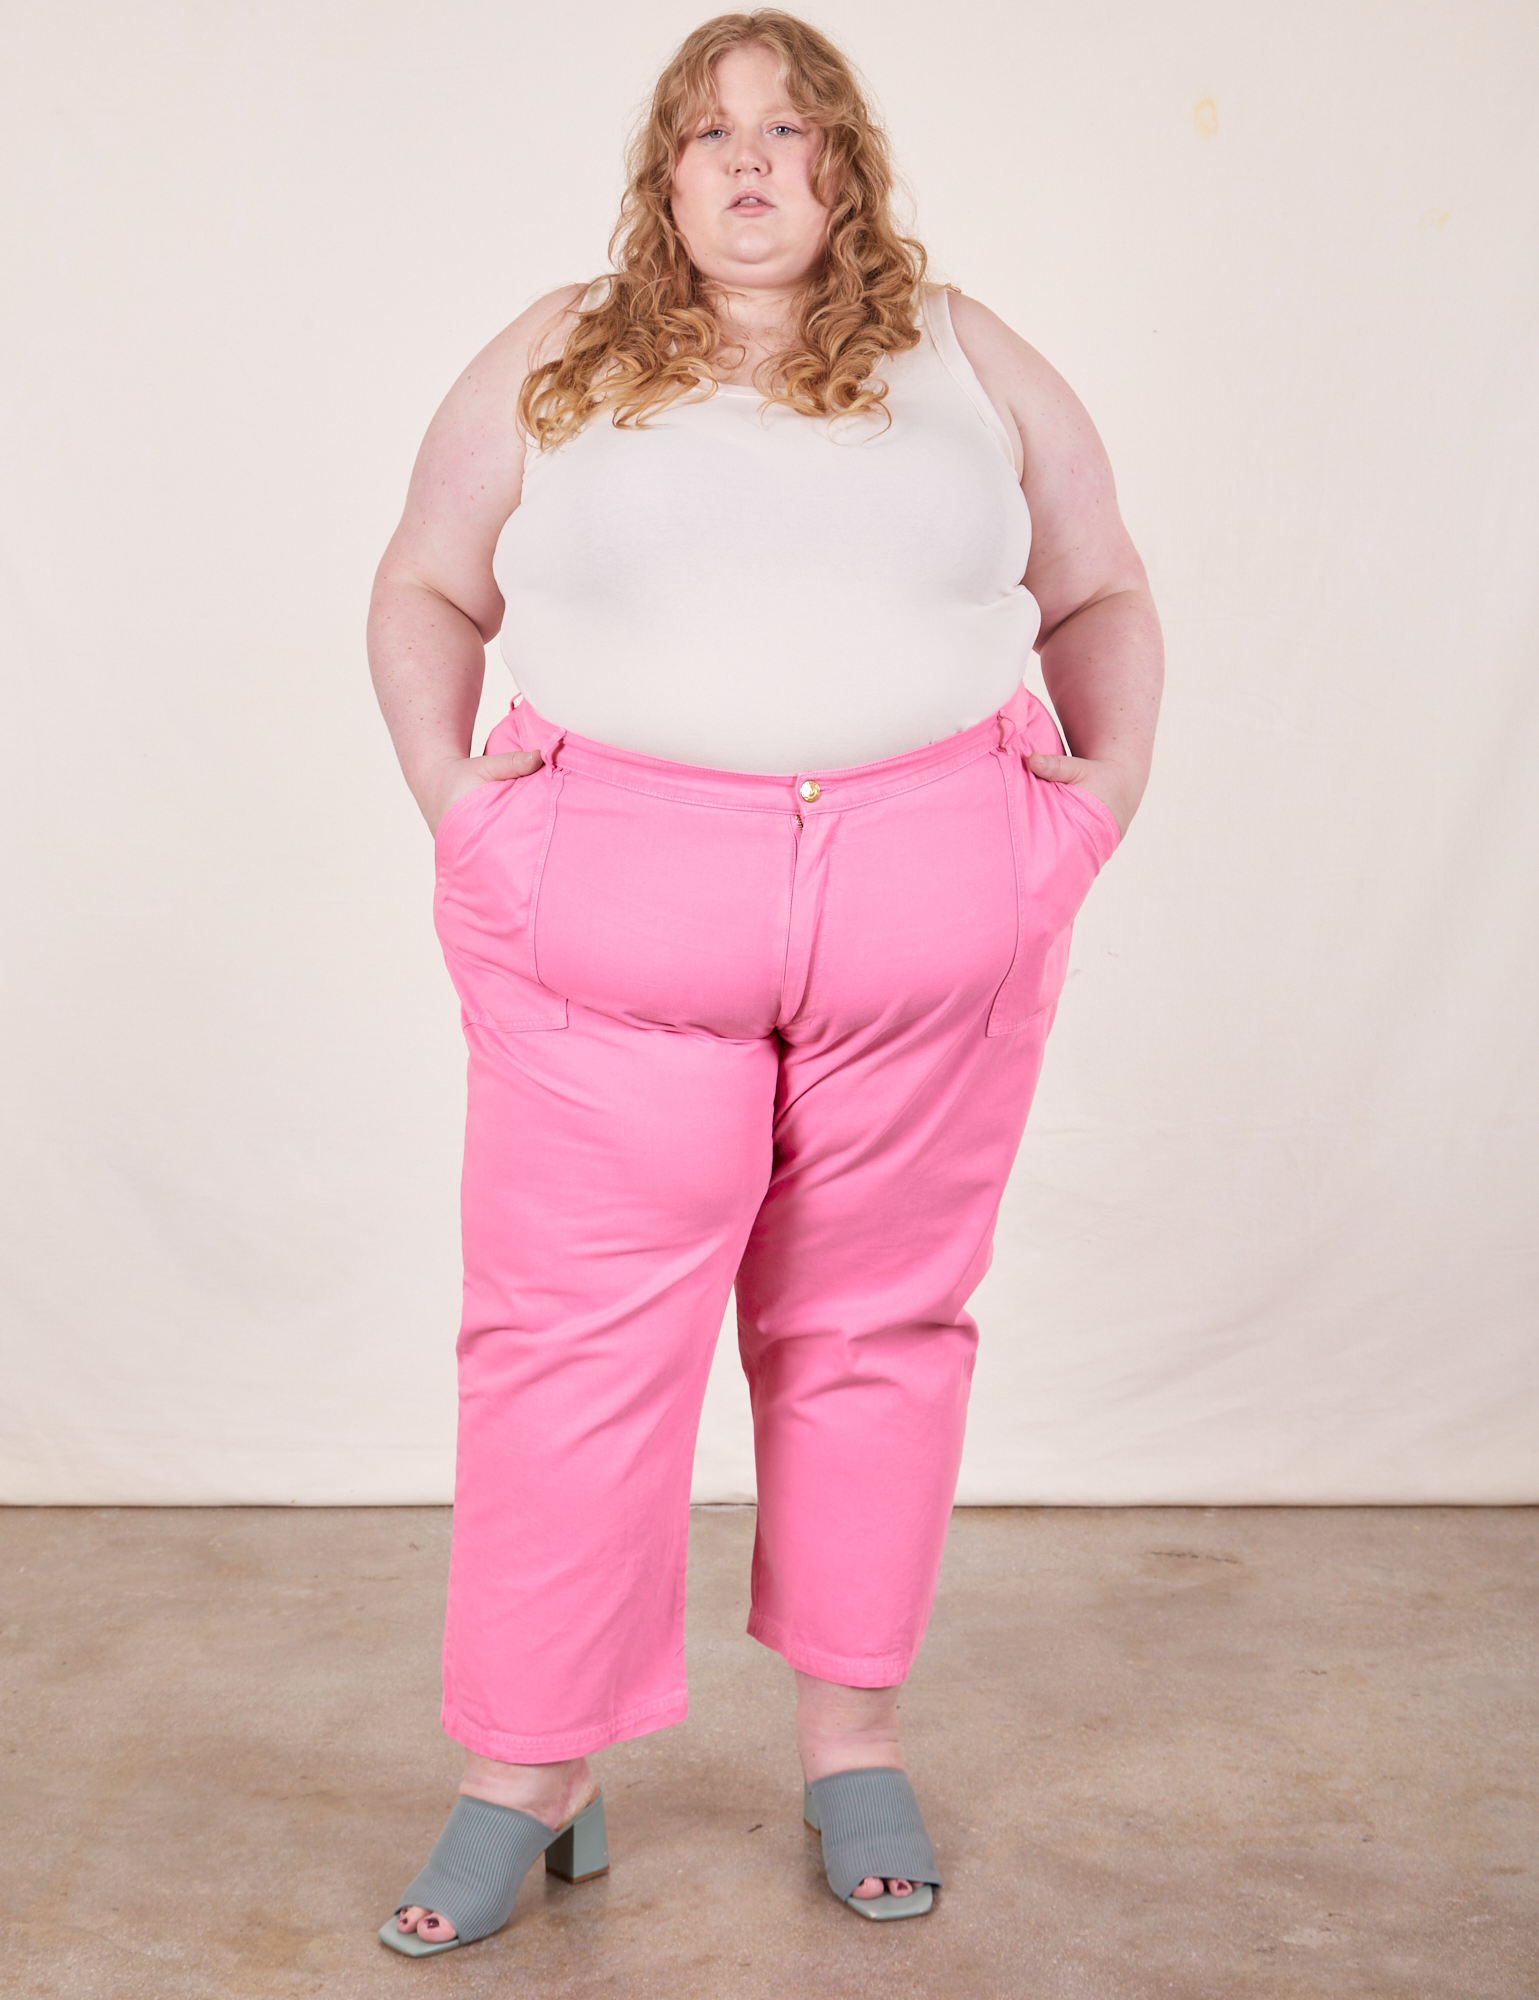 Catie is 5&#39;11&quot; and wearing size 5XL Work Pants in Bubblegum Pink paired with Tank Top in vintage tee off-white